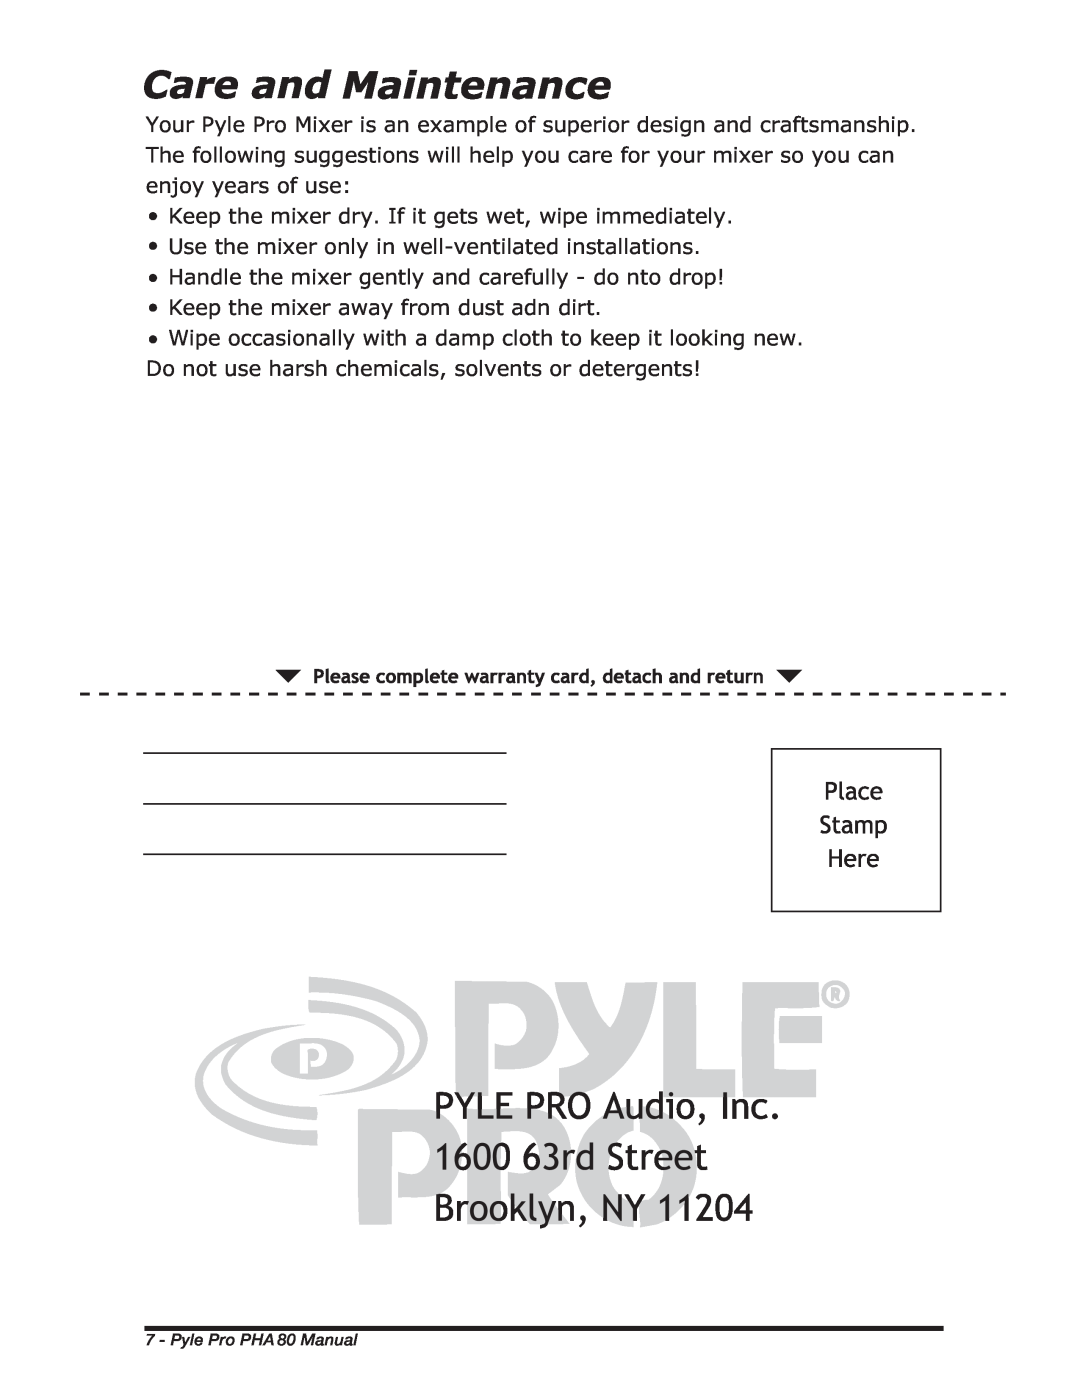 PYLE Audio PHA80 manual Use the mixer only in well-ventilatedinstallations 